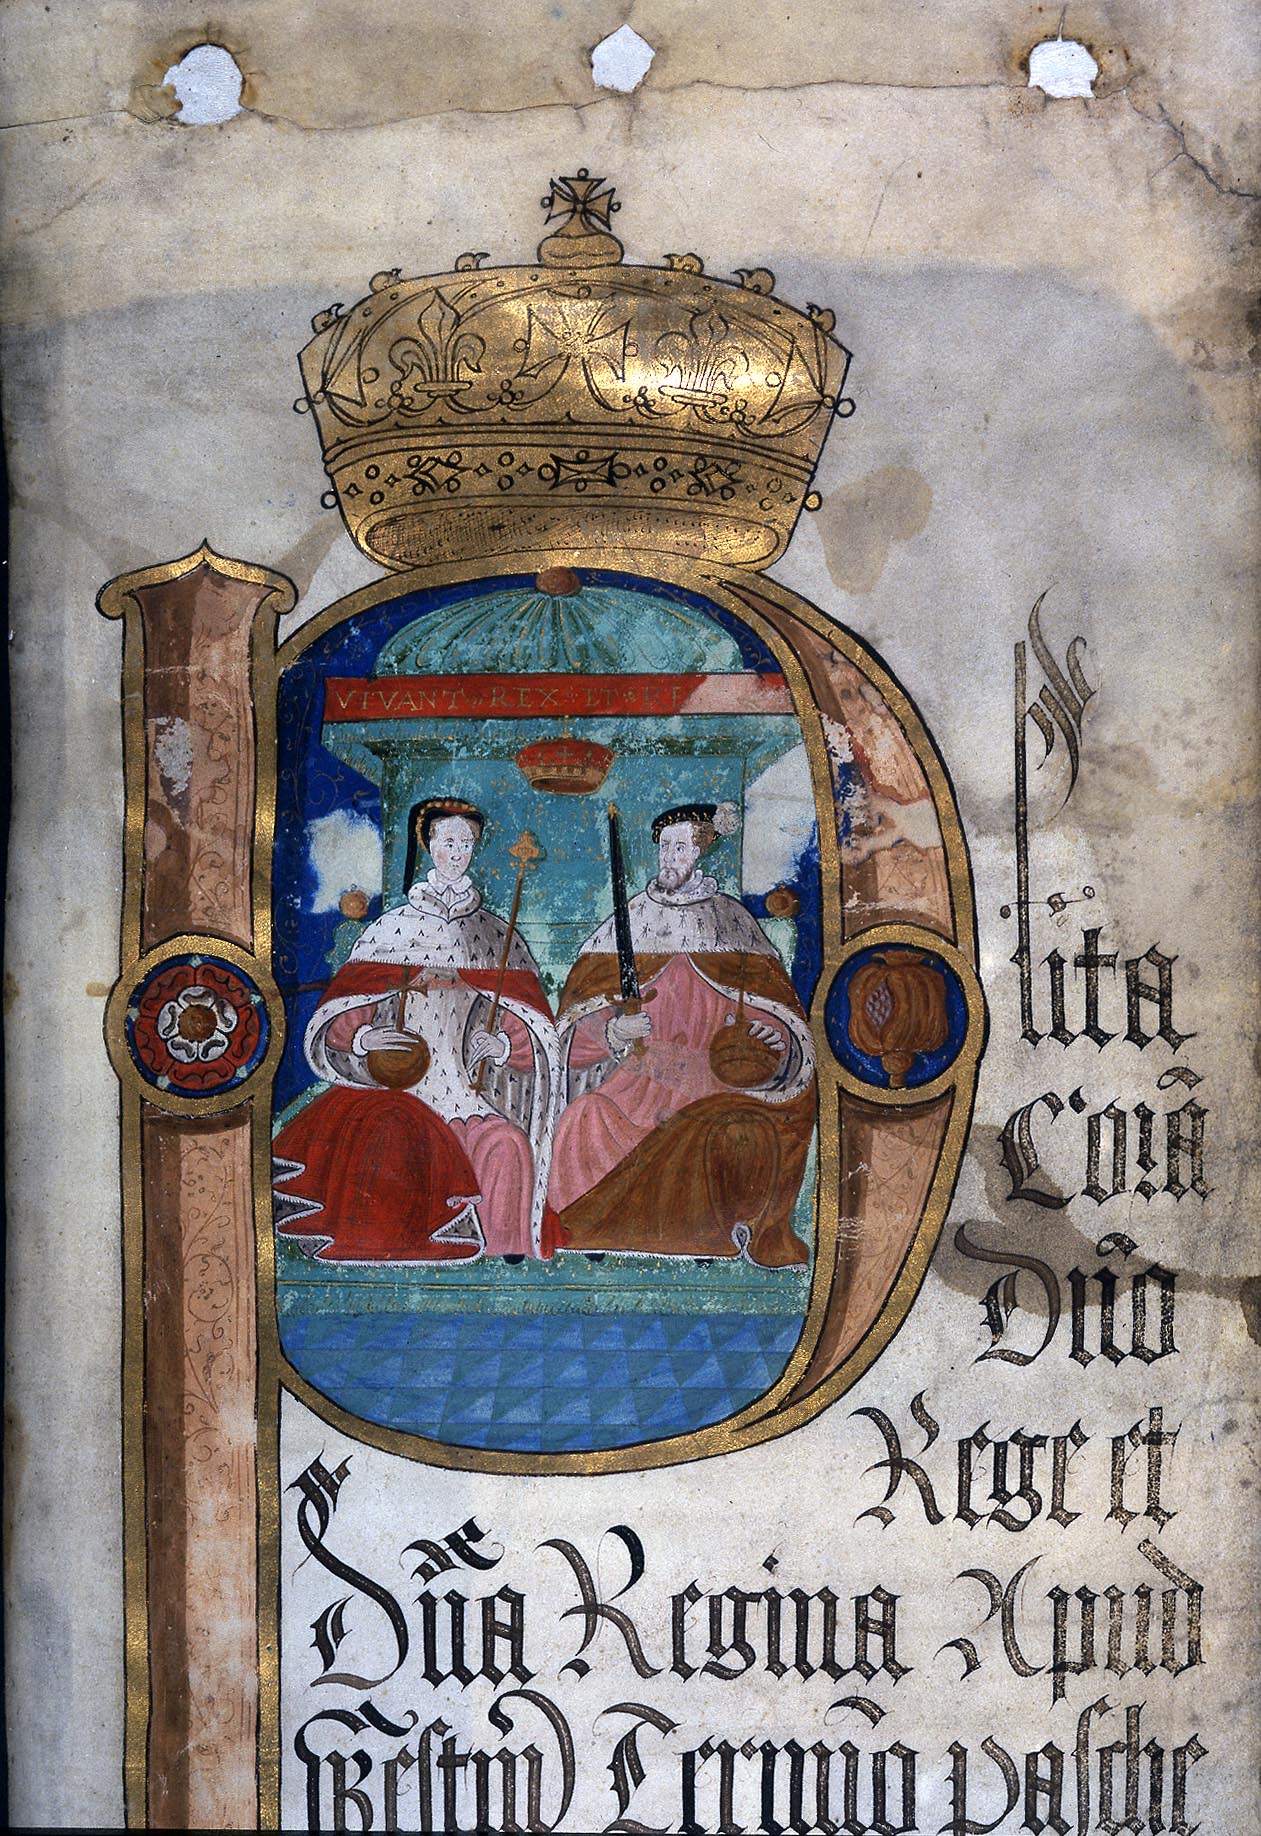 Medieval text starting with a P that contains an illustration of Mary I and Philip II.